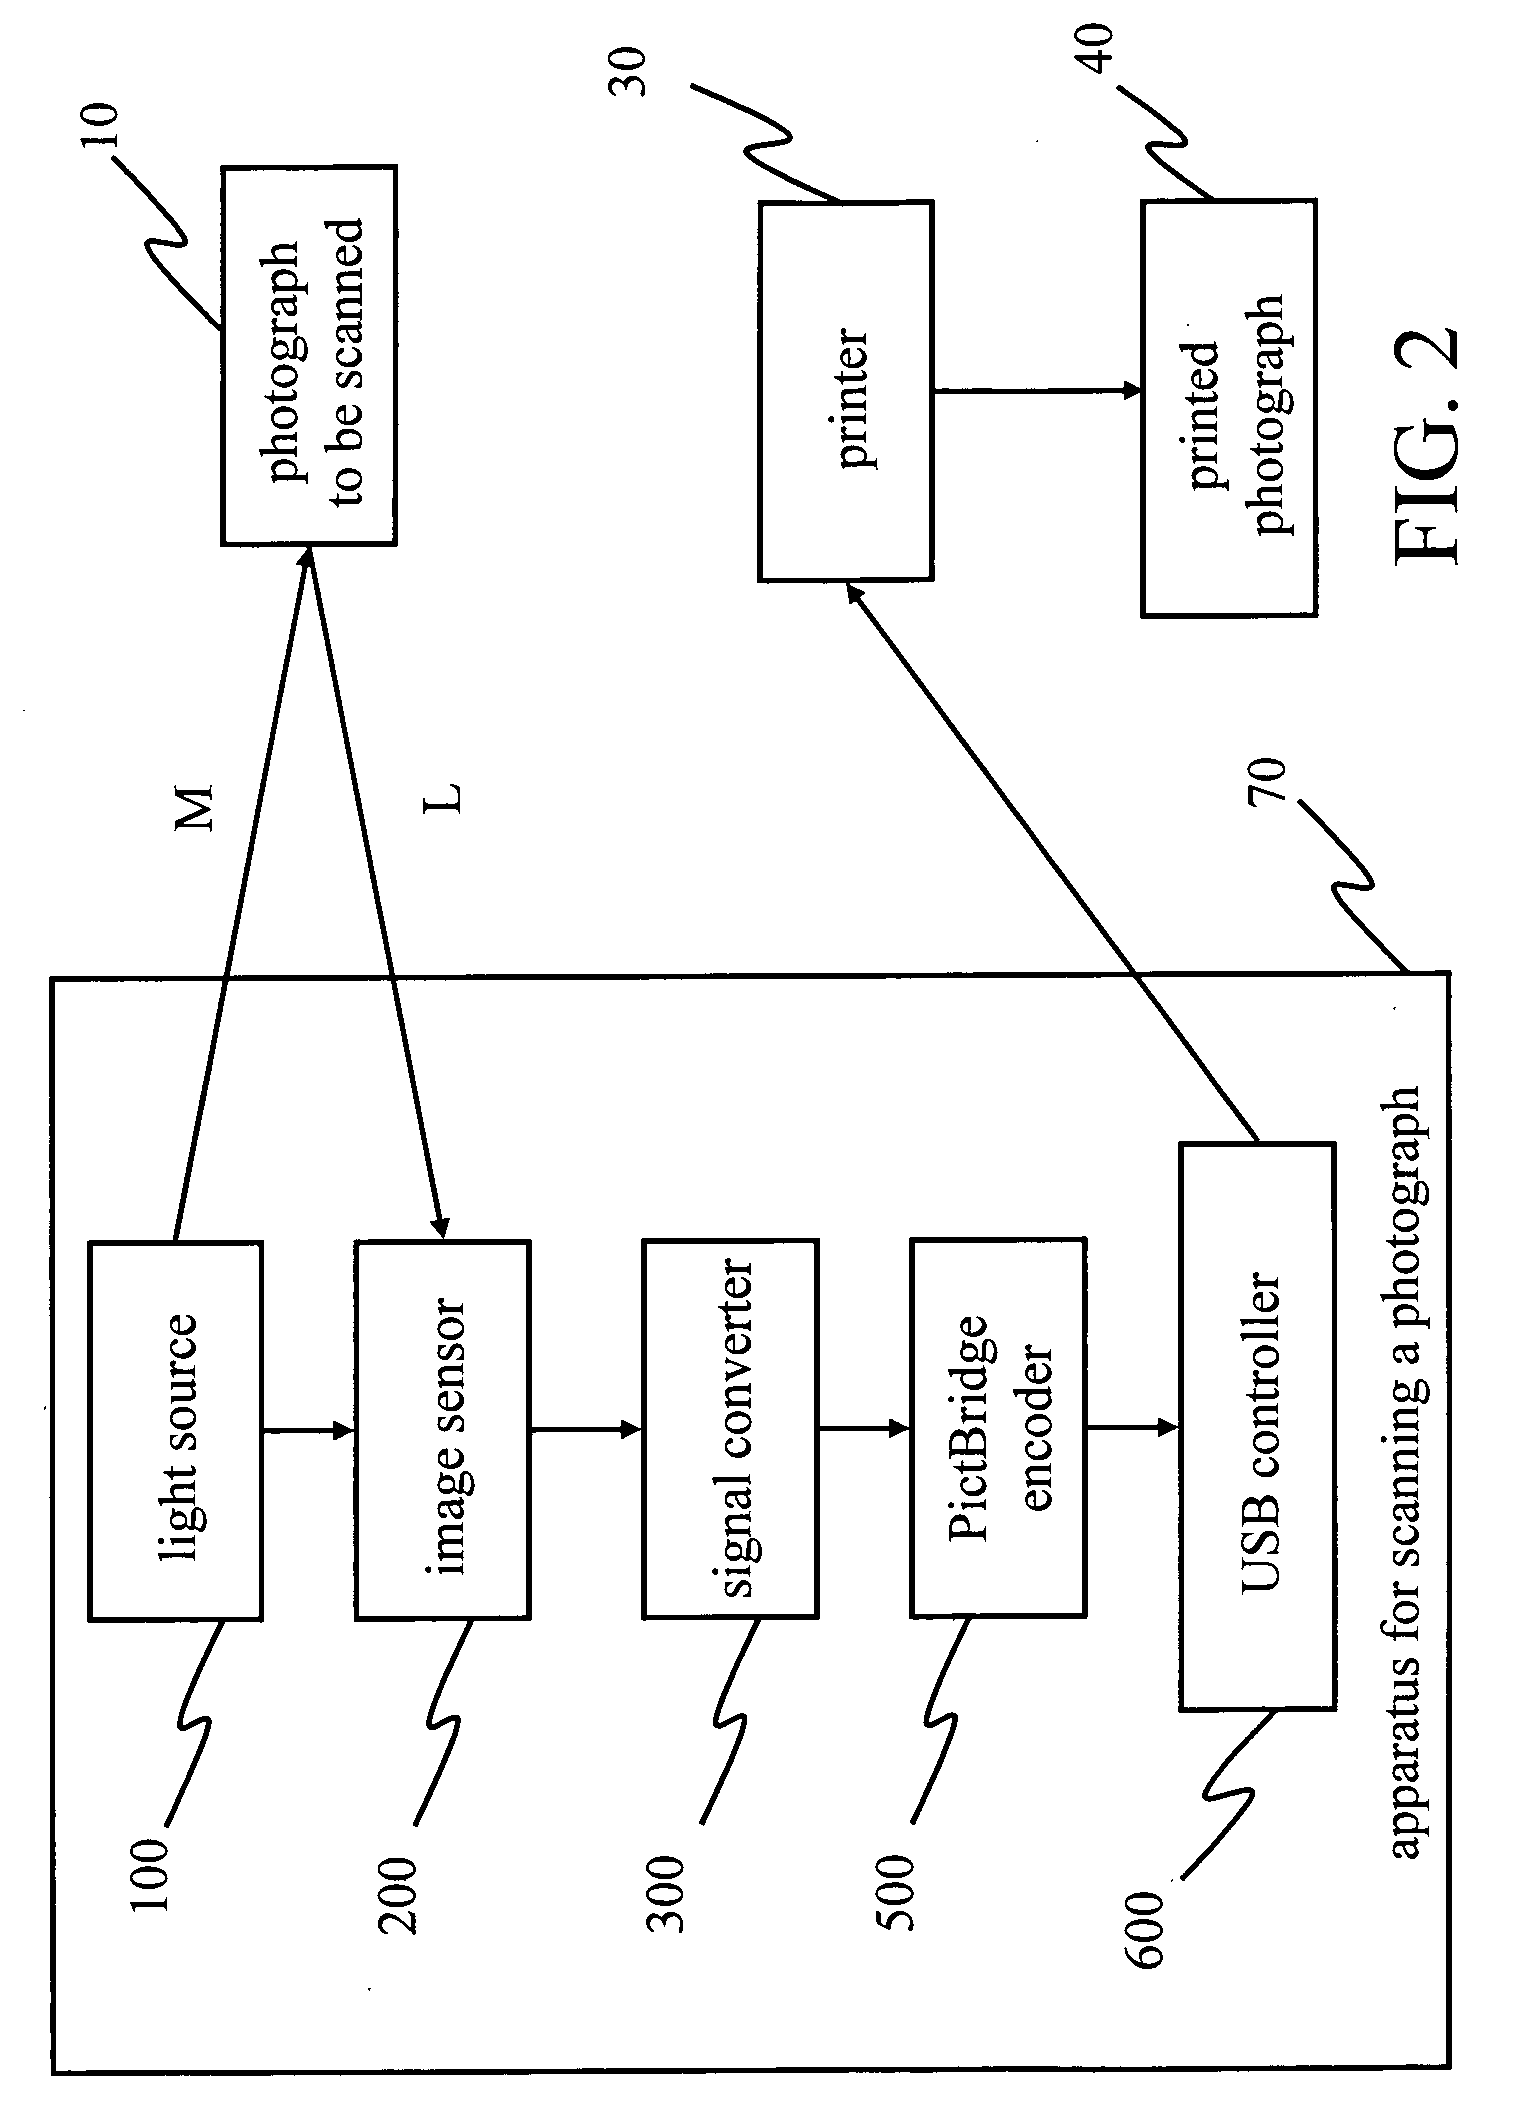 Apparatus for scanning photograph